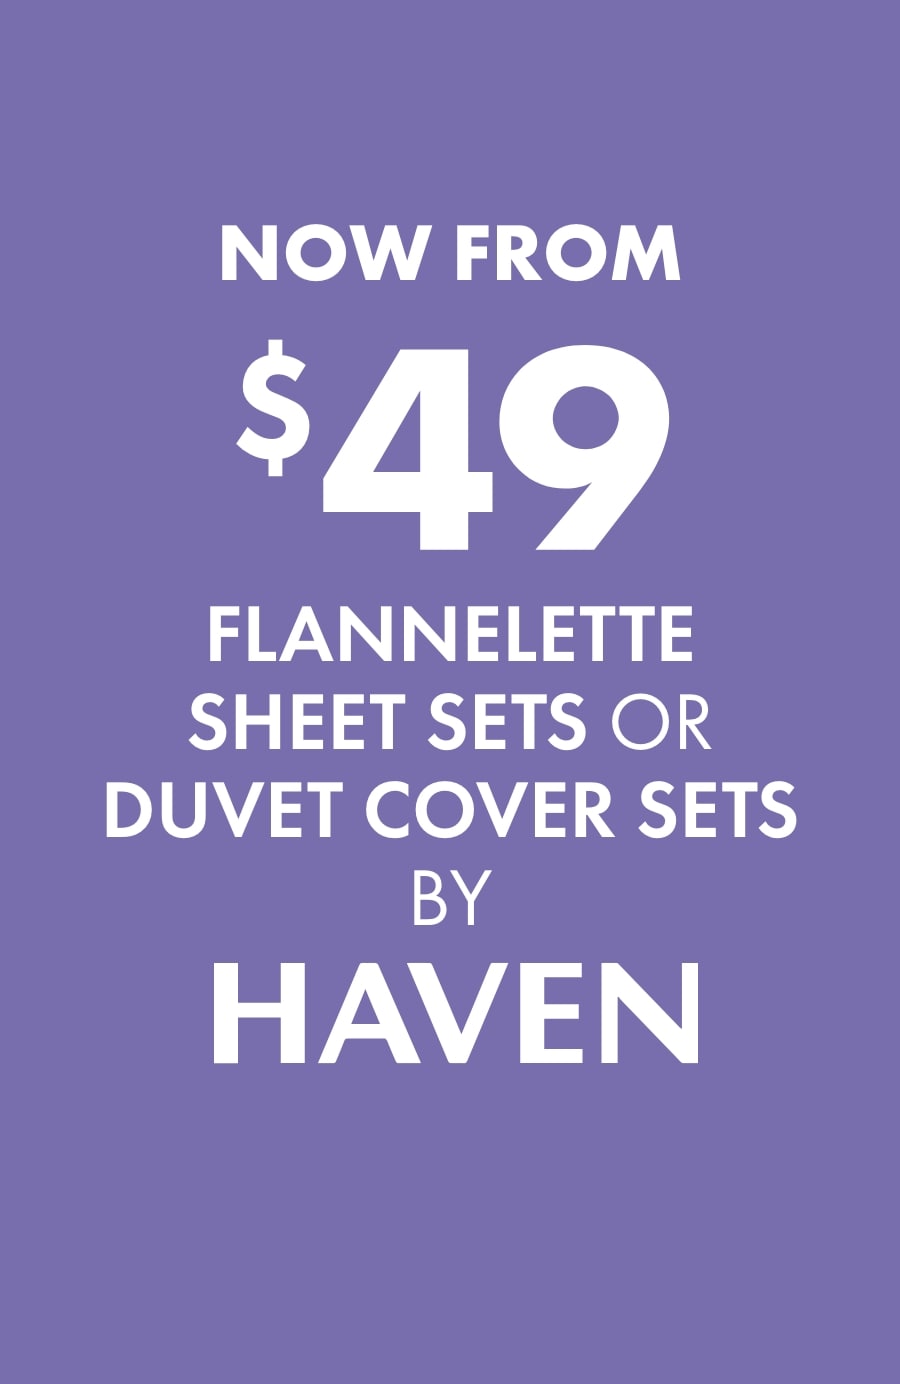 Now From $49 Flannelette Sheets & Duvet Cover Sets by Haven